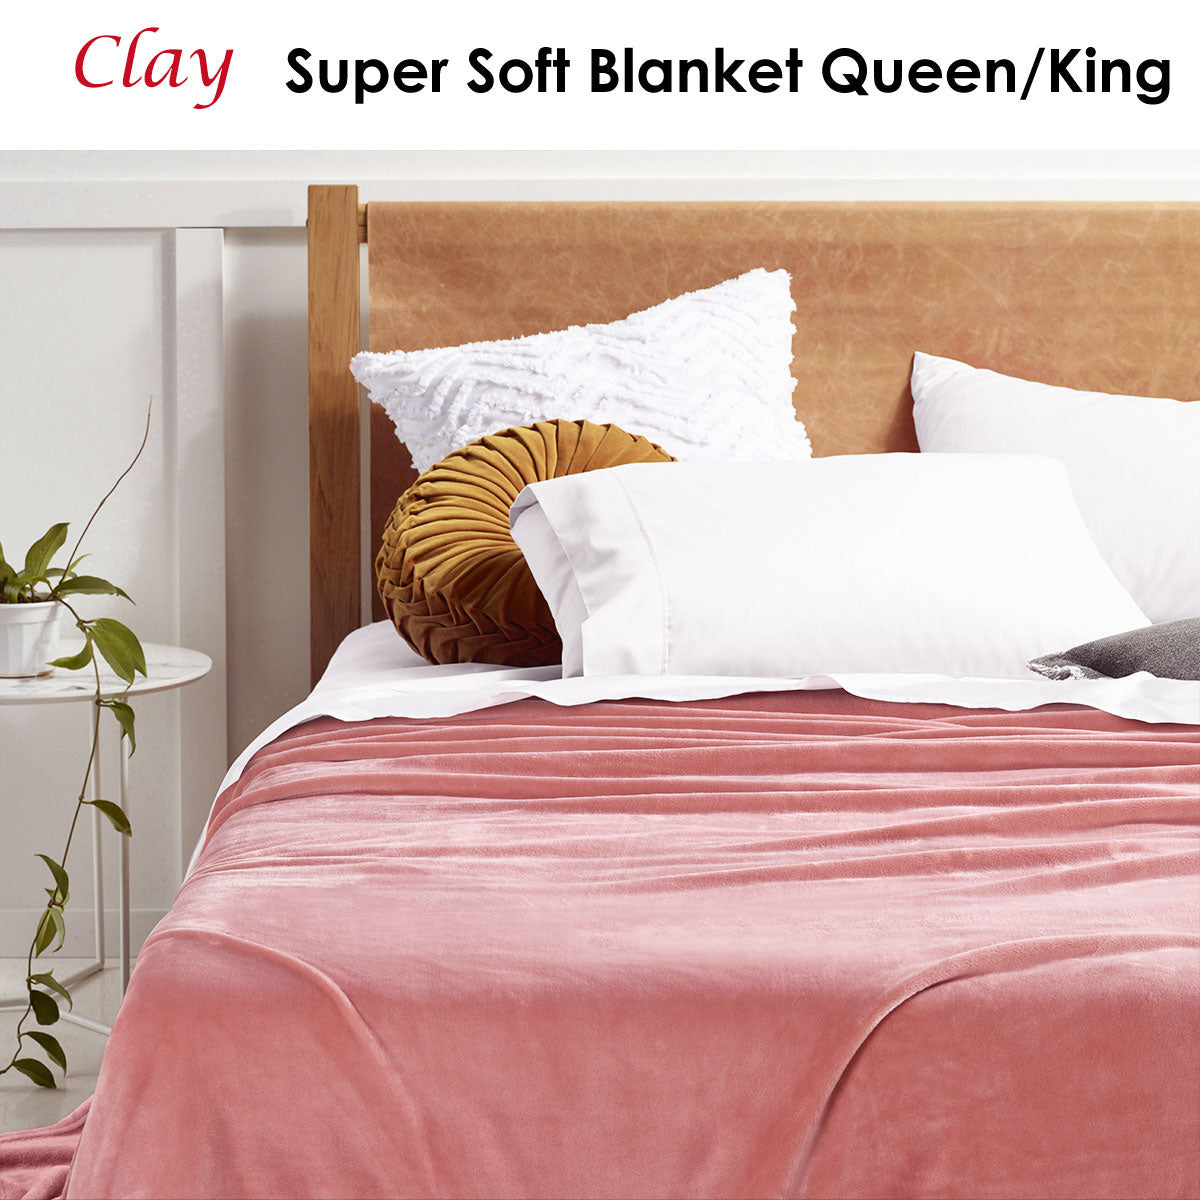 Accessorize Clay Super Soft Blanket Queen/King - Blankets - Zanlana Design and Home Decor